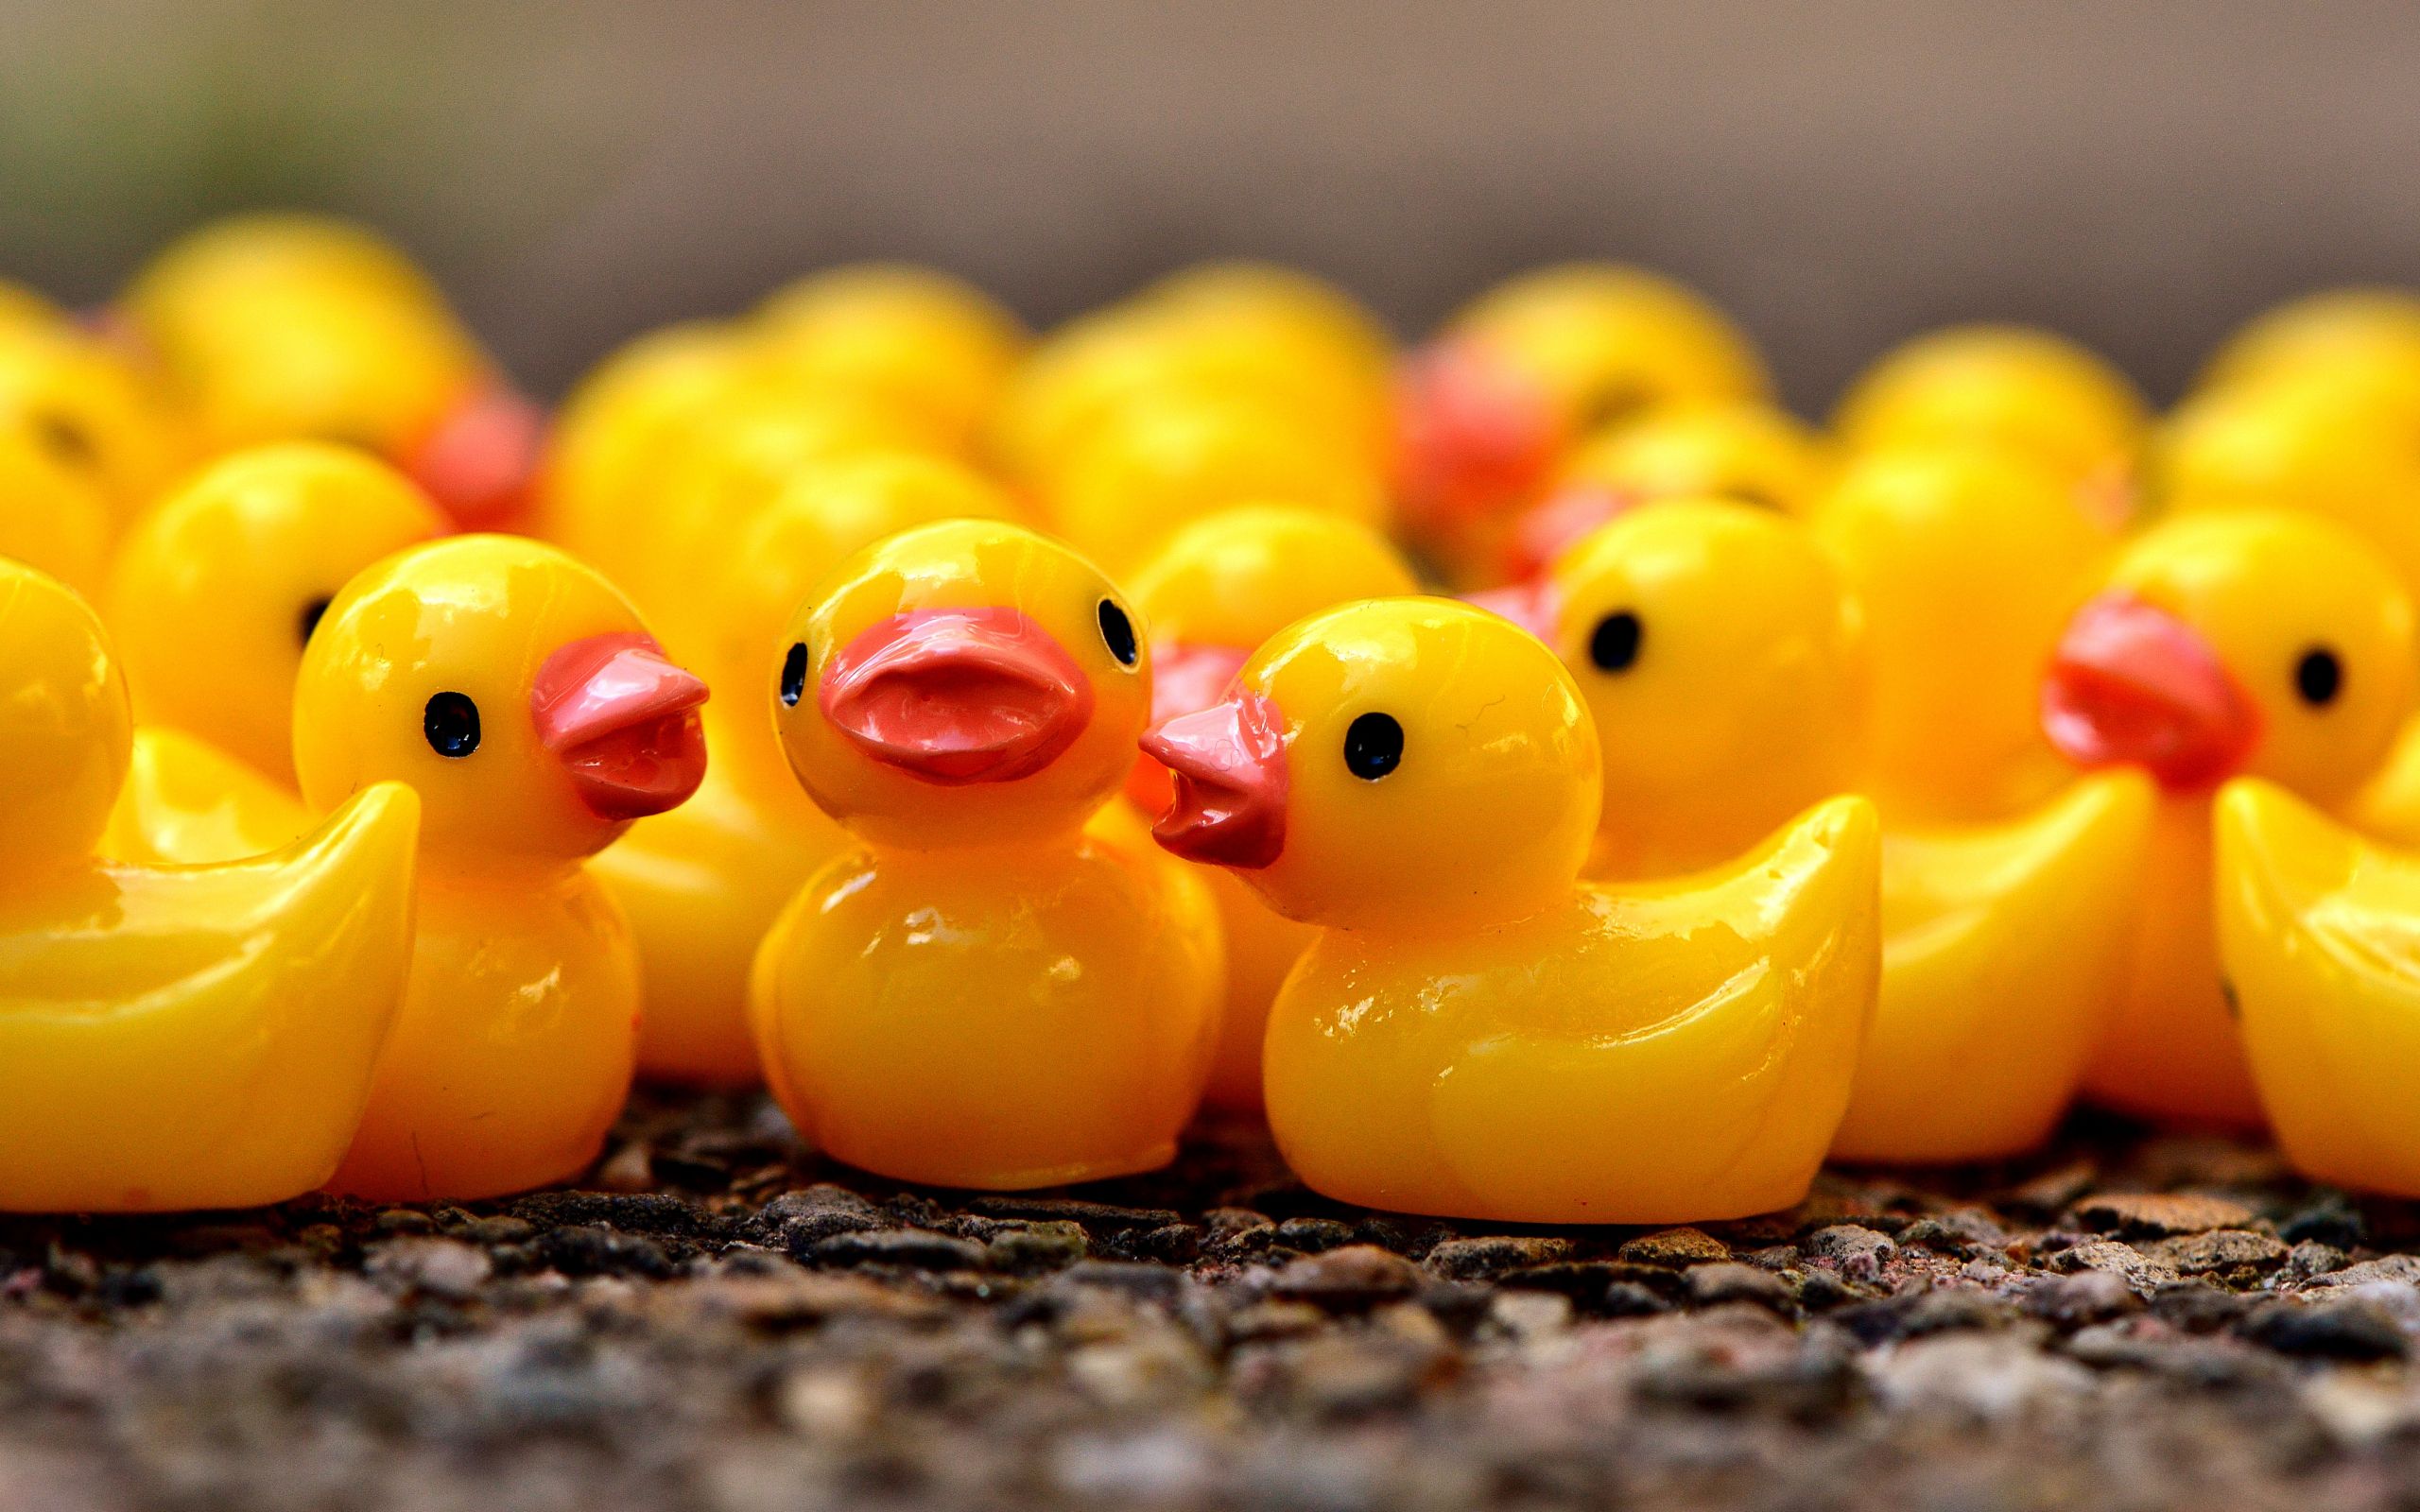 Desktop Wallpaper Rubber Ducks, Yellow Toys, HD Image, Picture, Background, 8395ad